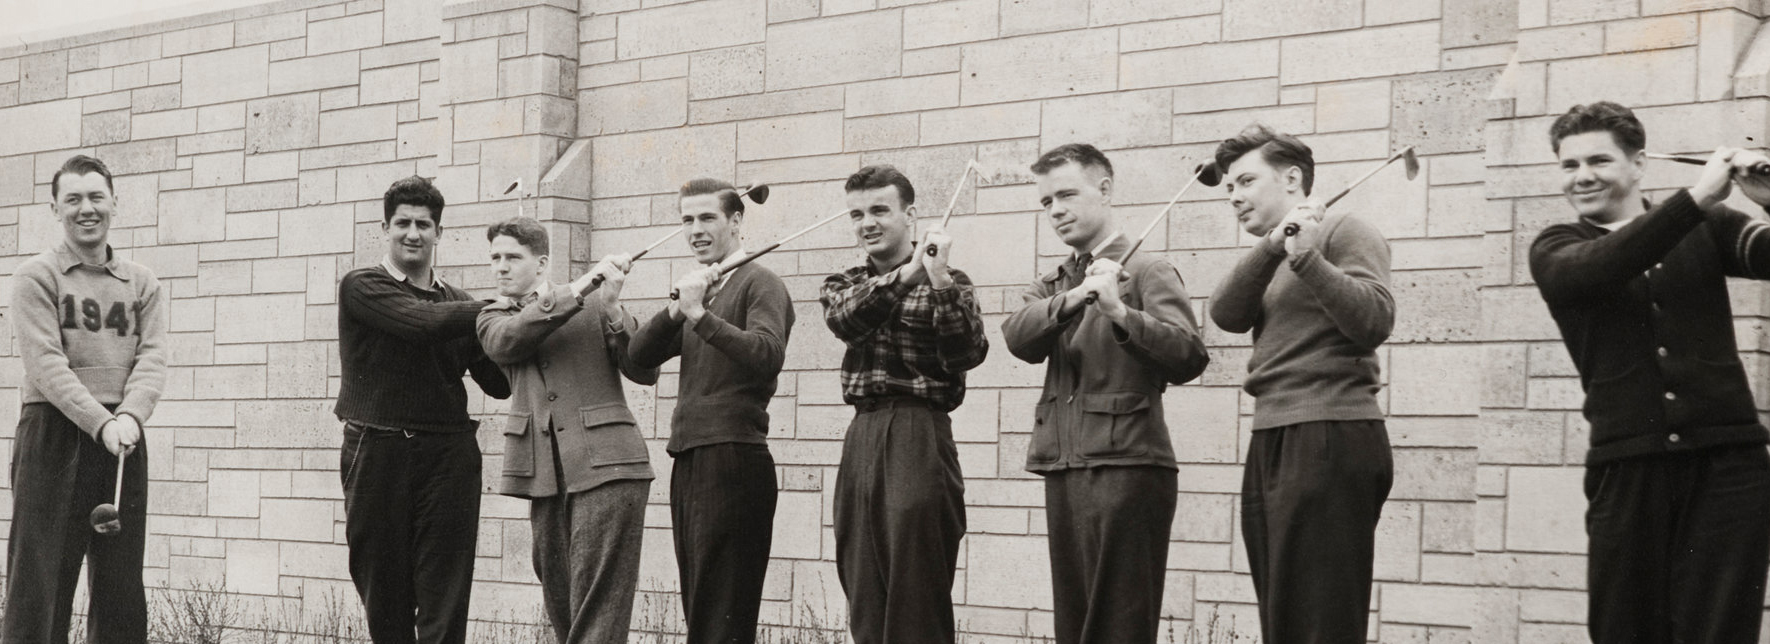   1940-41 Golf team, with Athletic Hall of Fame member coach Tom Hamper (left). "14.09.02 Golf Team, 1941" and "C82-150-643 1941 Athletics Golf - Oversize" and " (l - r) Tom Hamper [Coach - Athletic Hall of Fame member], Samuel Cavellero, Joseph Mahoney, Henry Lahue, Nicolas Kocisko, Pal Johnson, Robert Lindorfer" on verso. Also stamped "Photo by Kaul" on verso. Copied from original 11" x 14" print. Copied on October 28, 2009. This image may not be reproduced for any reason without the express written consent of the Department of Special Collections, University of St. Thomas Libraries, 2115 Summit Avenue, Saint Paul, MN 55105; (651) 962 ? 5467 ; libweb@stthomas.edu. Athletics Hall of Fame. 